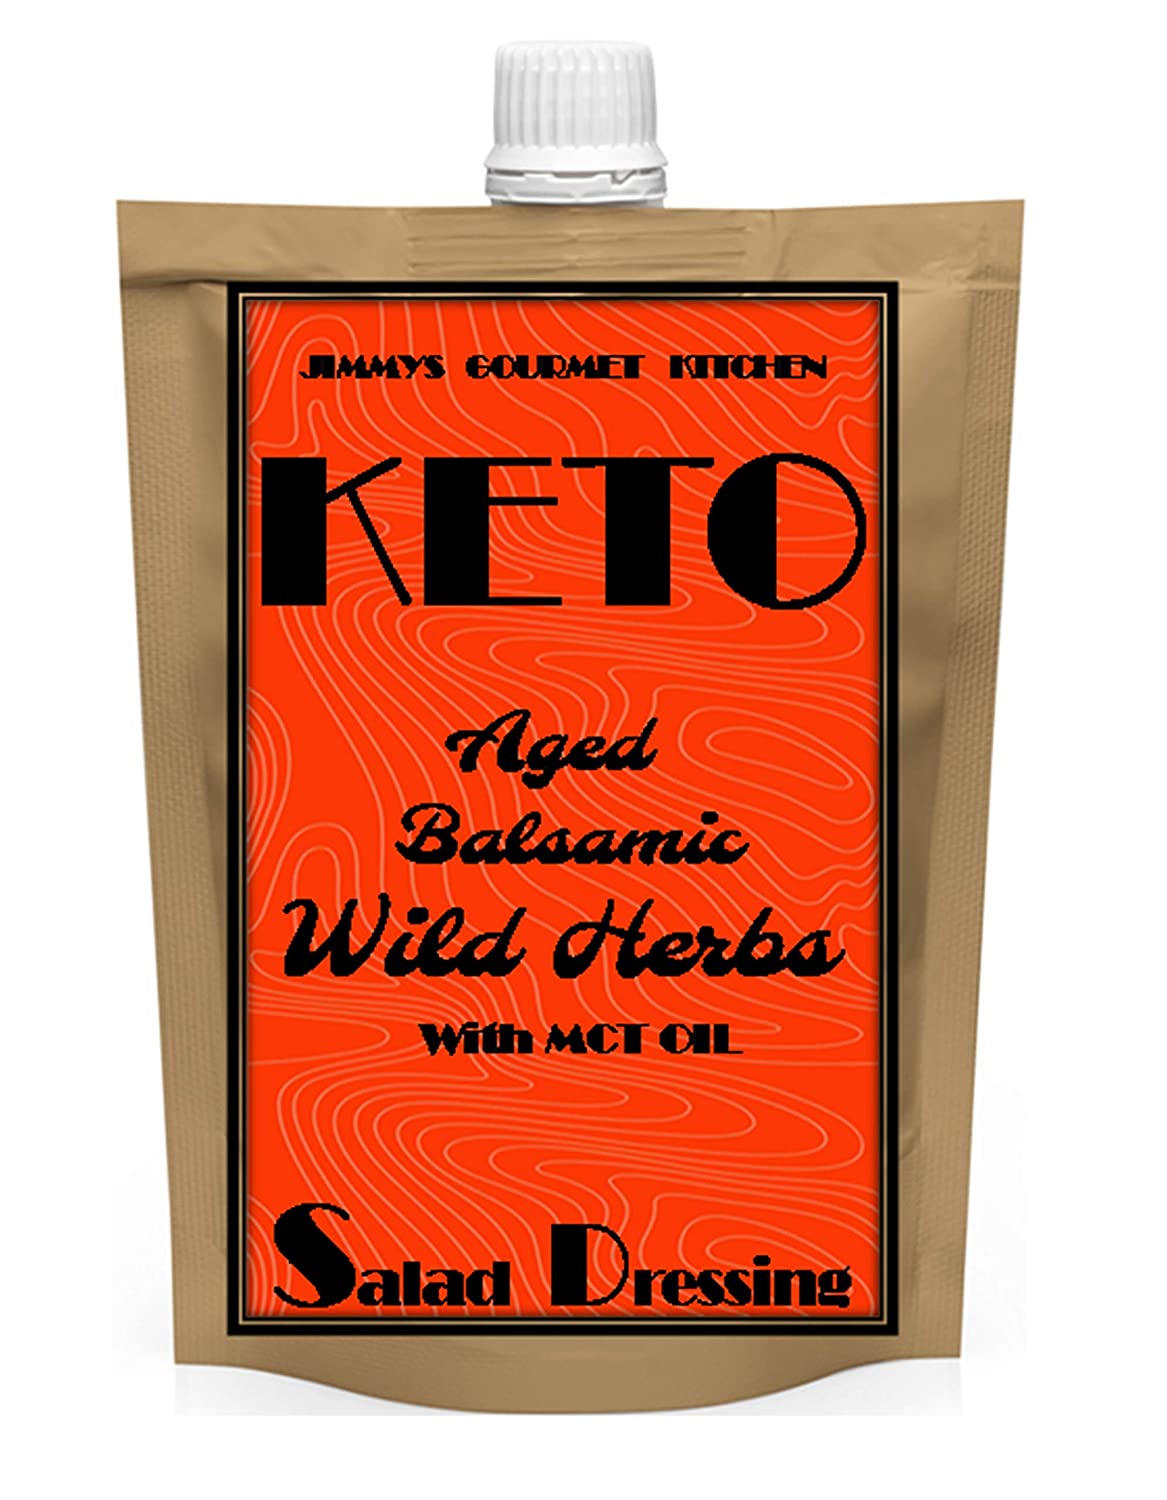 Jimmy's Gourmet Kitchen Keto Salad Dressing Wild Herbs with Aged Balsamic Image